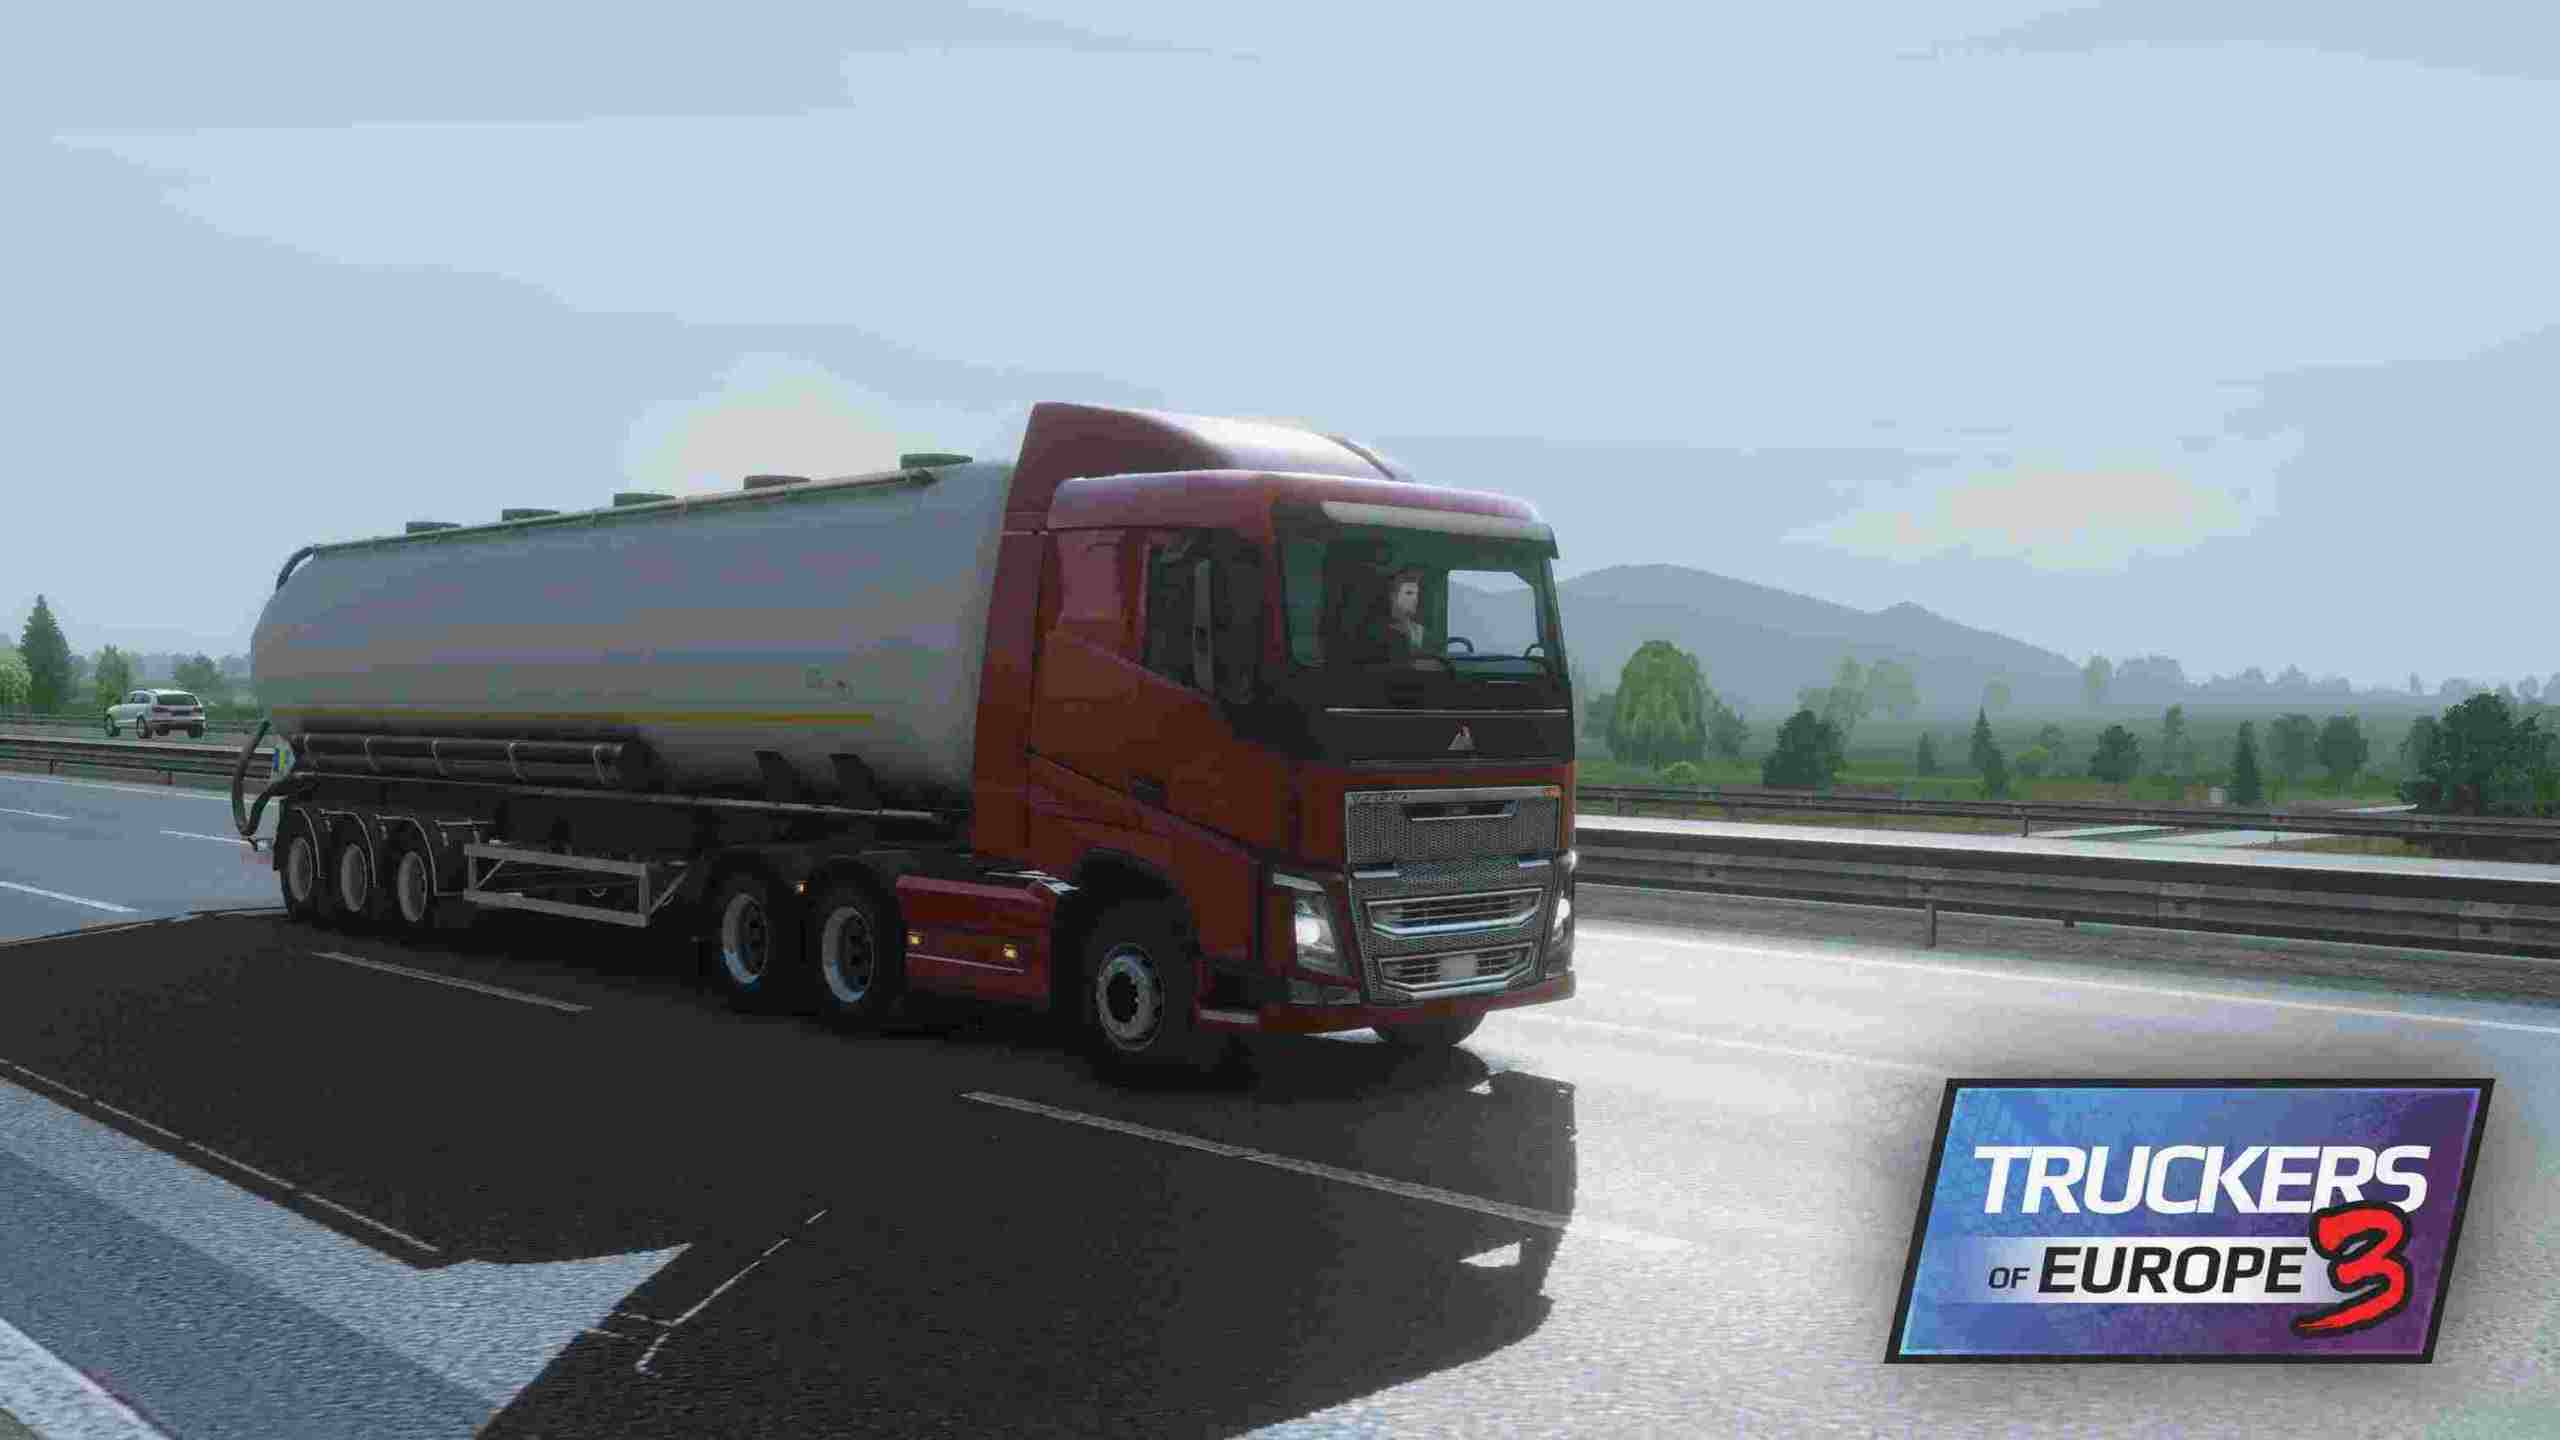 Truckers of Europe 3 0.45.2 APK MOD [Menu LMH, Huge Amount Of Money, everything, max level]